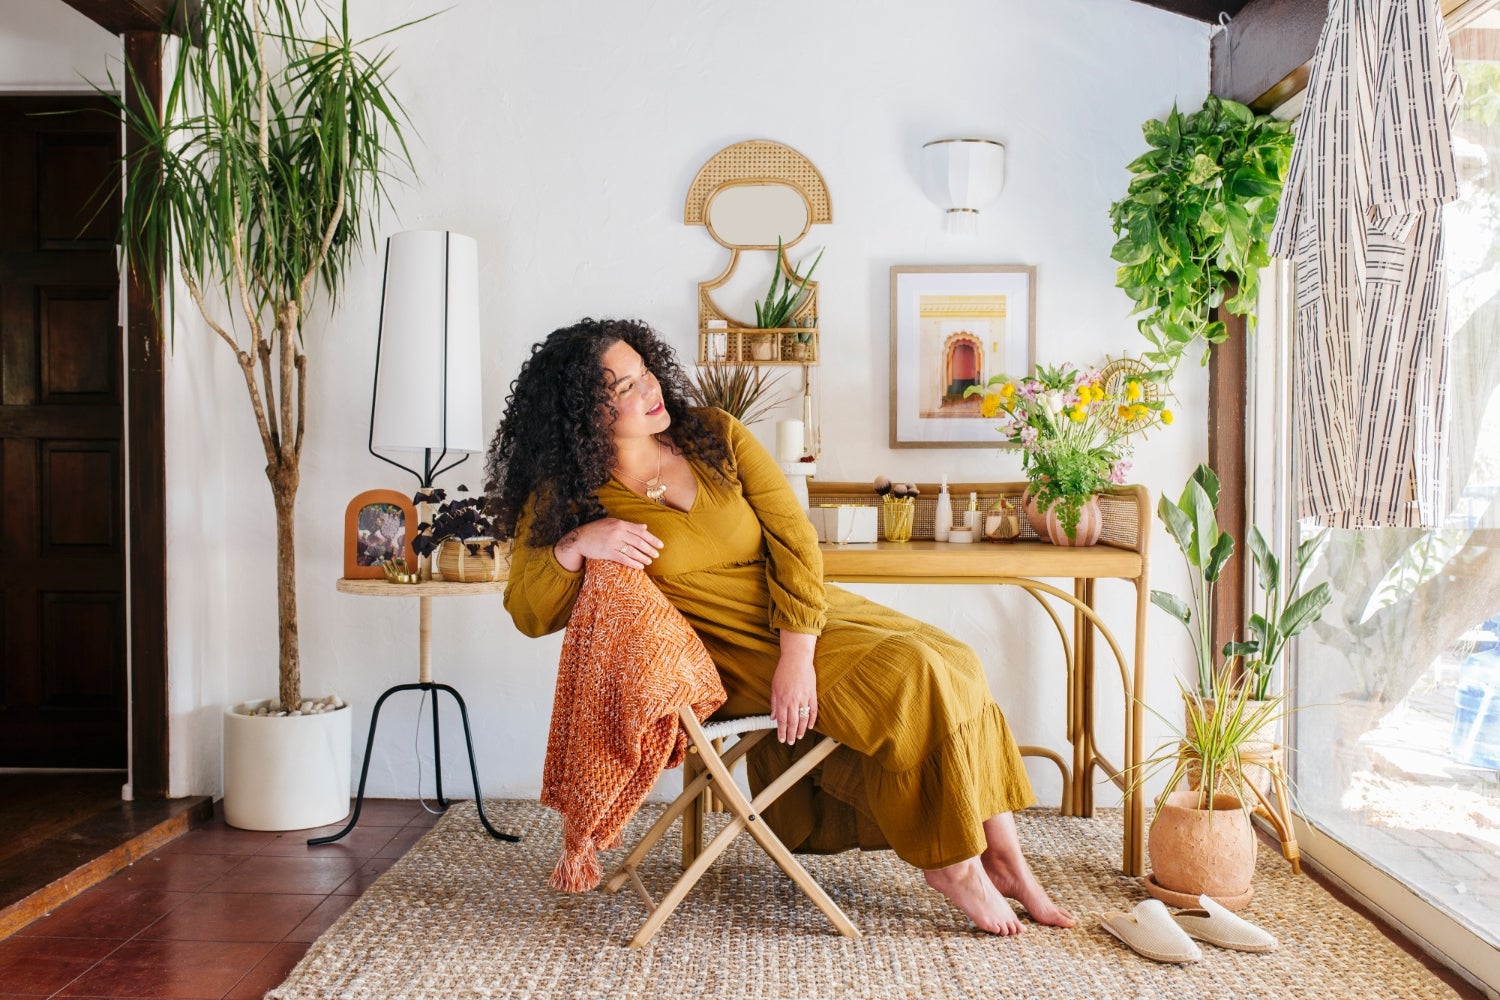 First Look: Justina Blakeney’s Jungalow Partnered With Target For A Home Collection And We Want Everything